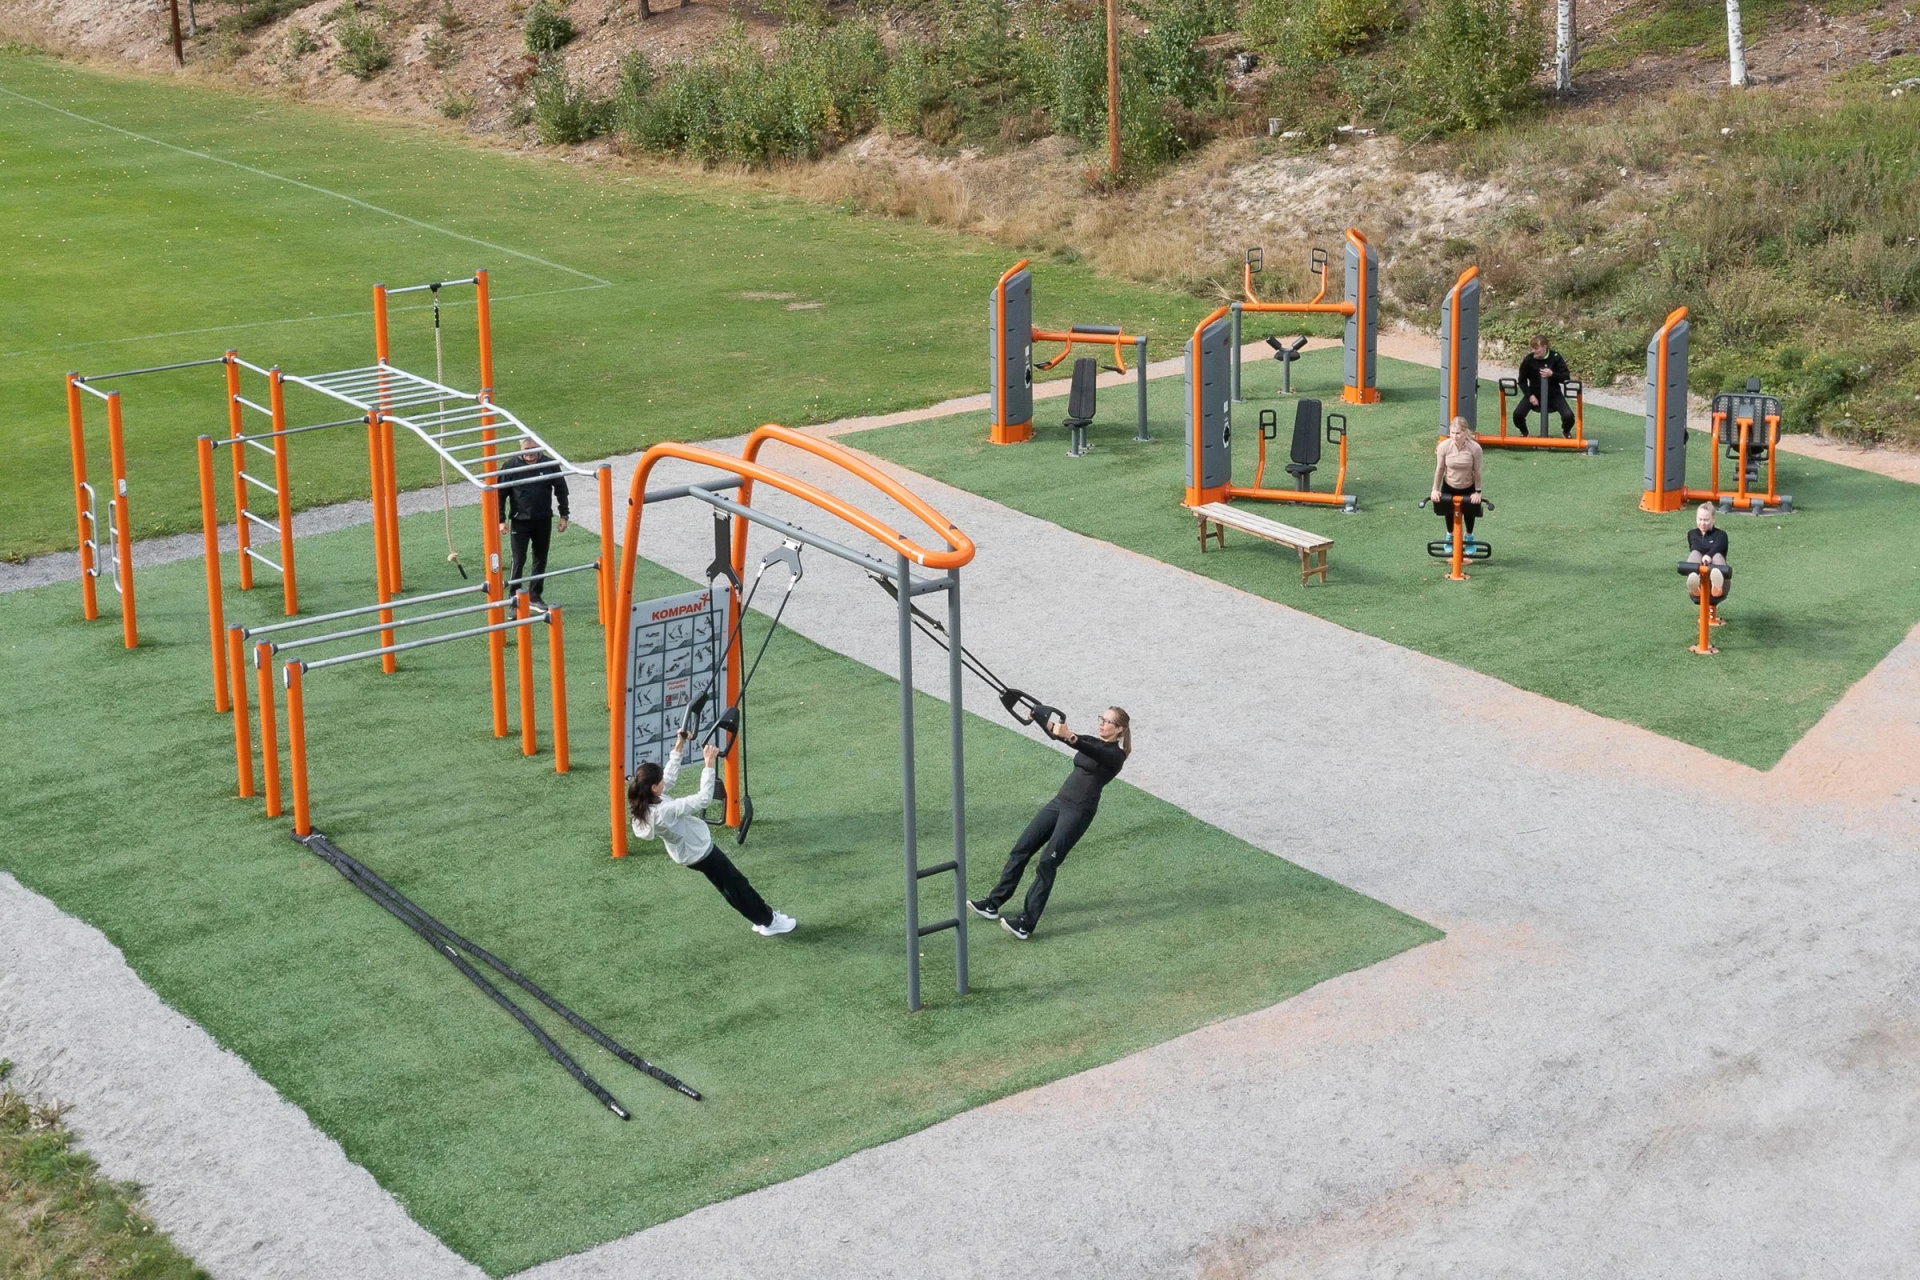 outdoor fitness site with different zones to make it more inclusive